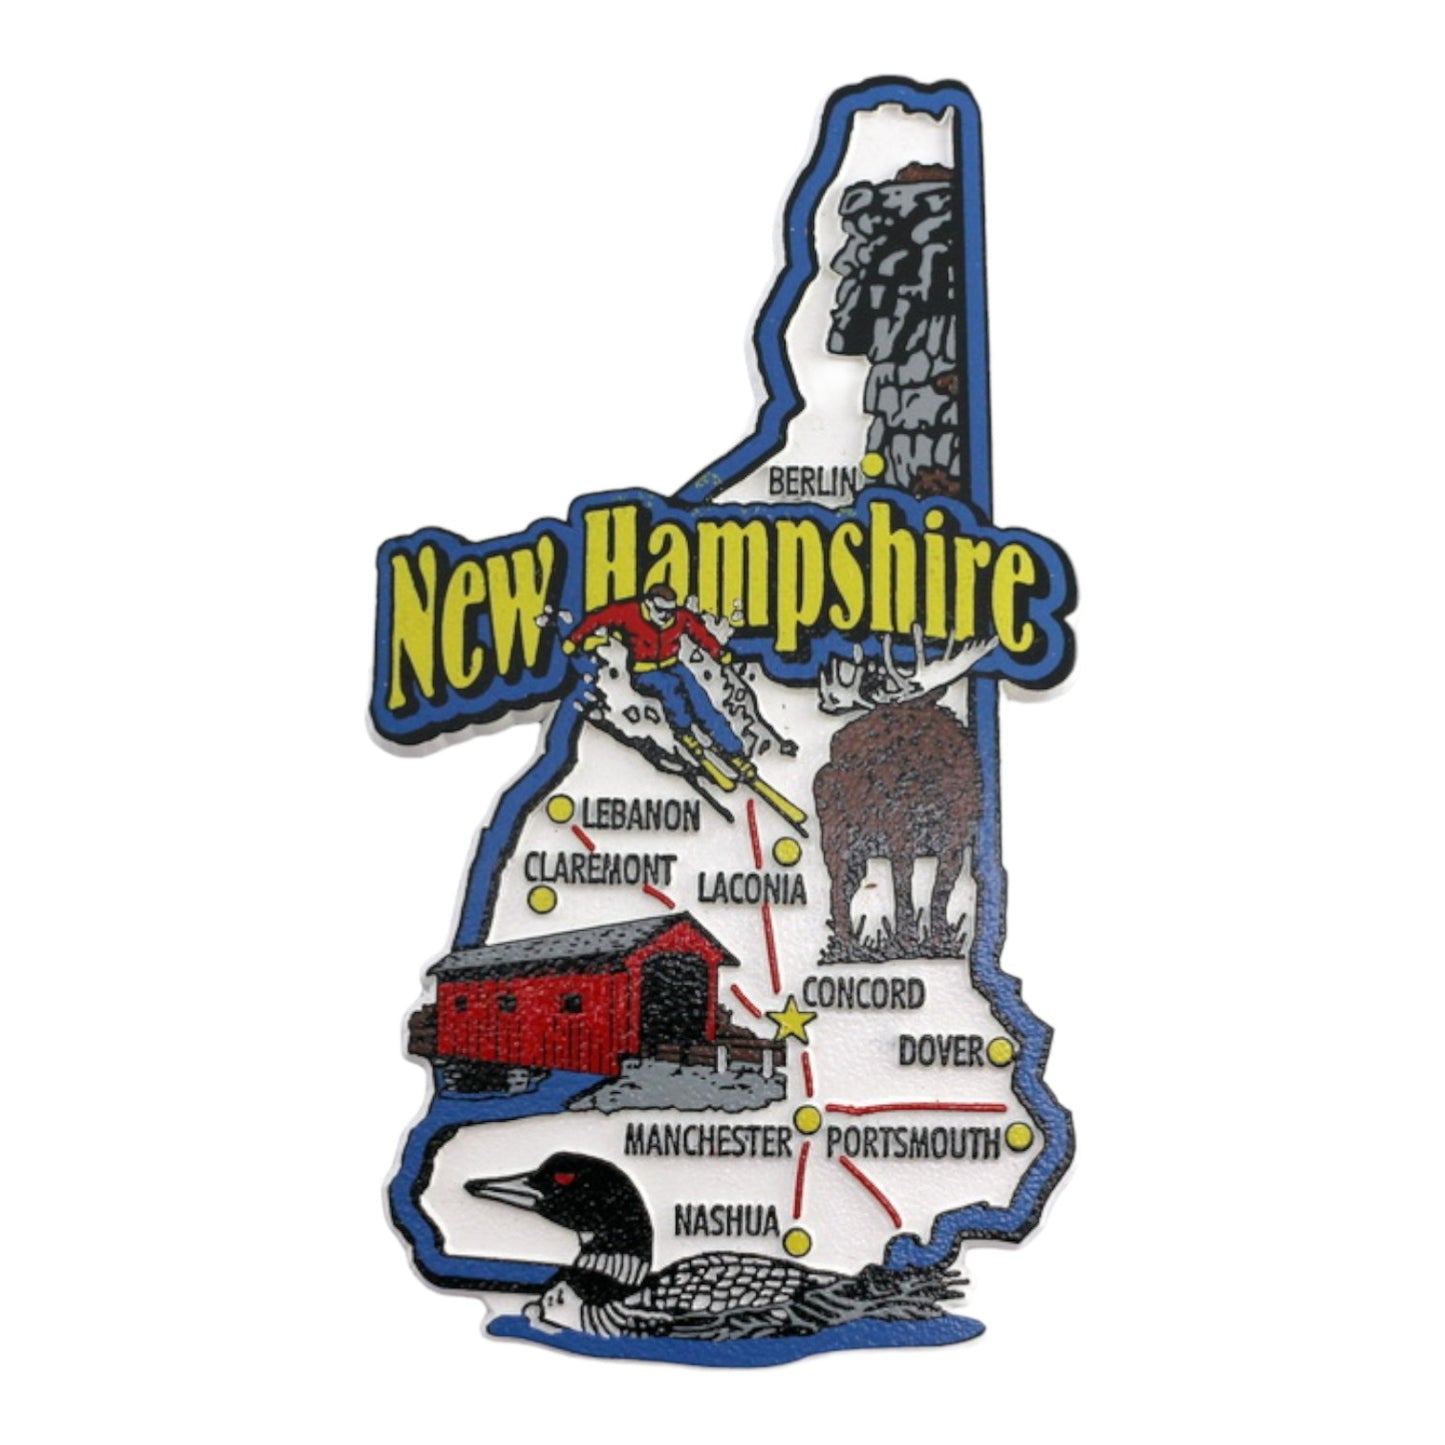 New Hampshire State Map and Landmarks Collage Fridge Souvenir Collectible Magnet